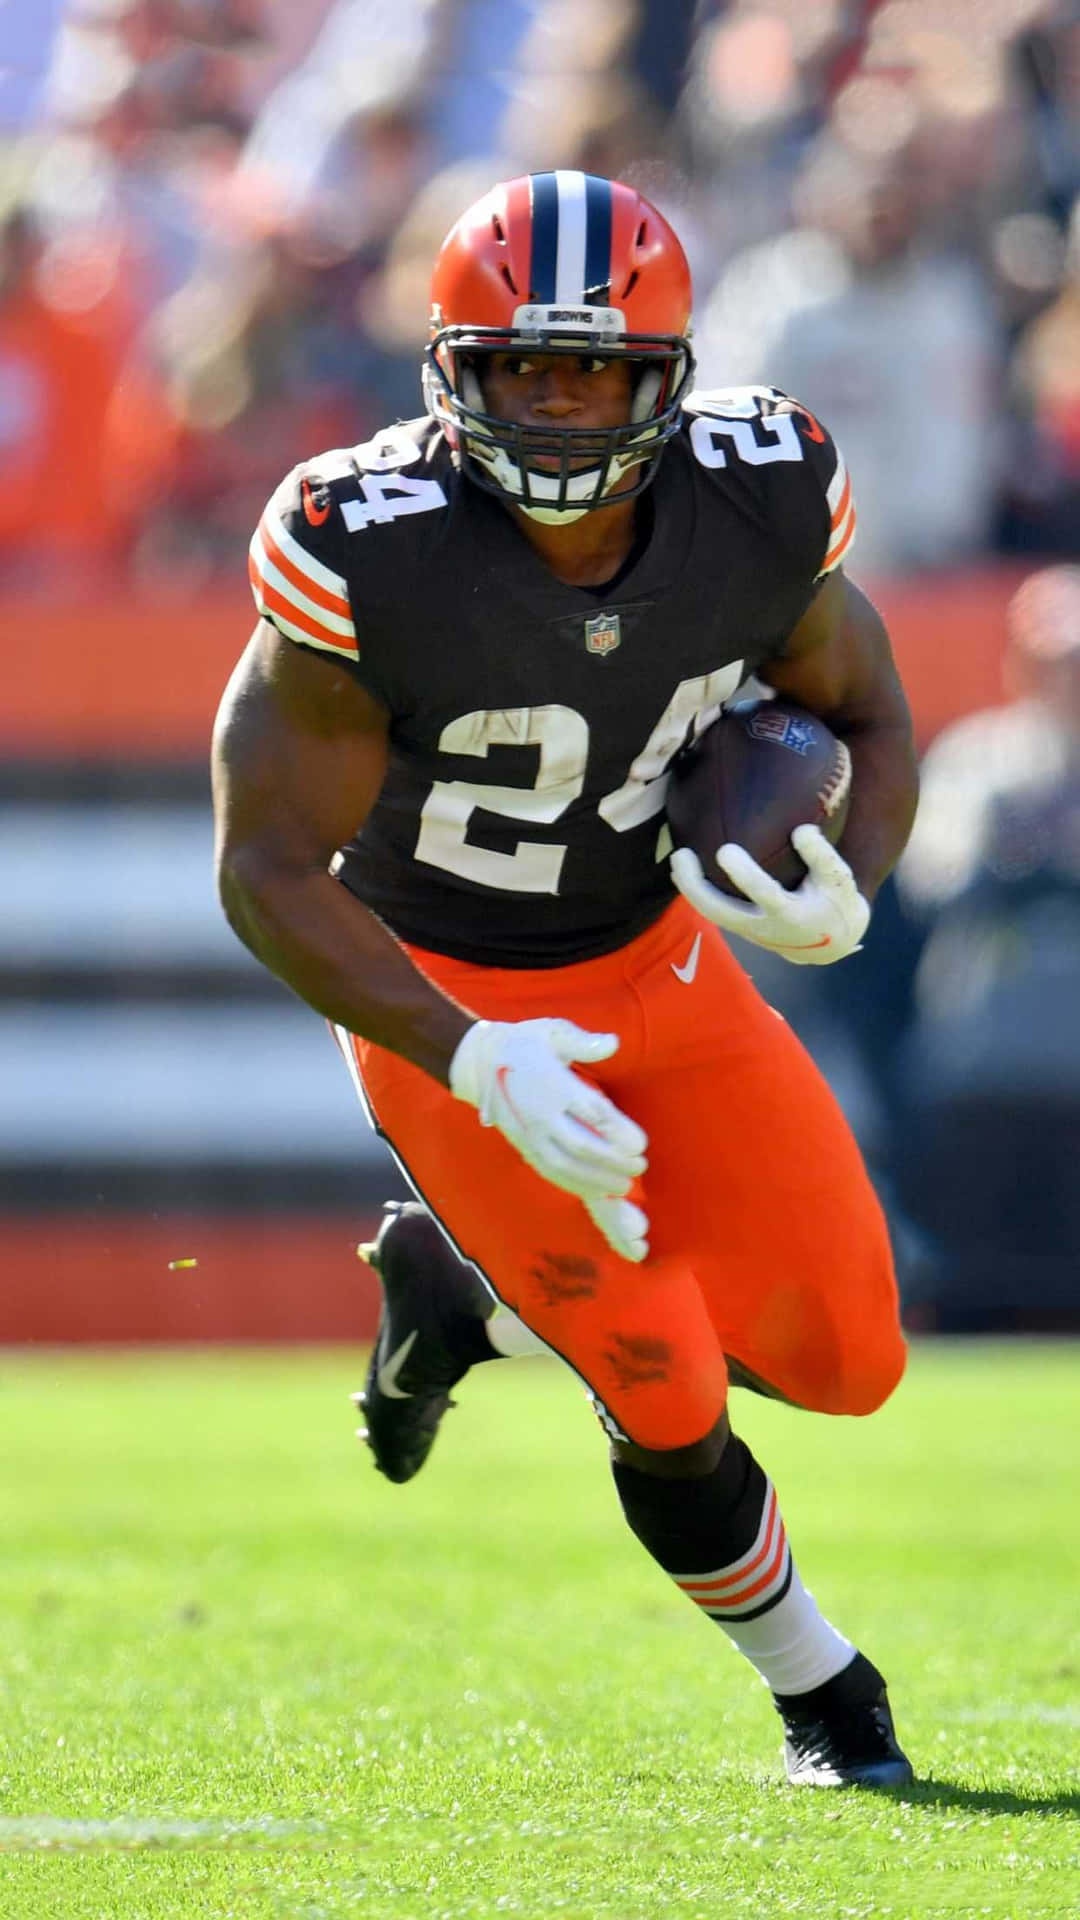 Cleveland Browns Player Running With Football Wallpaper